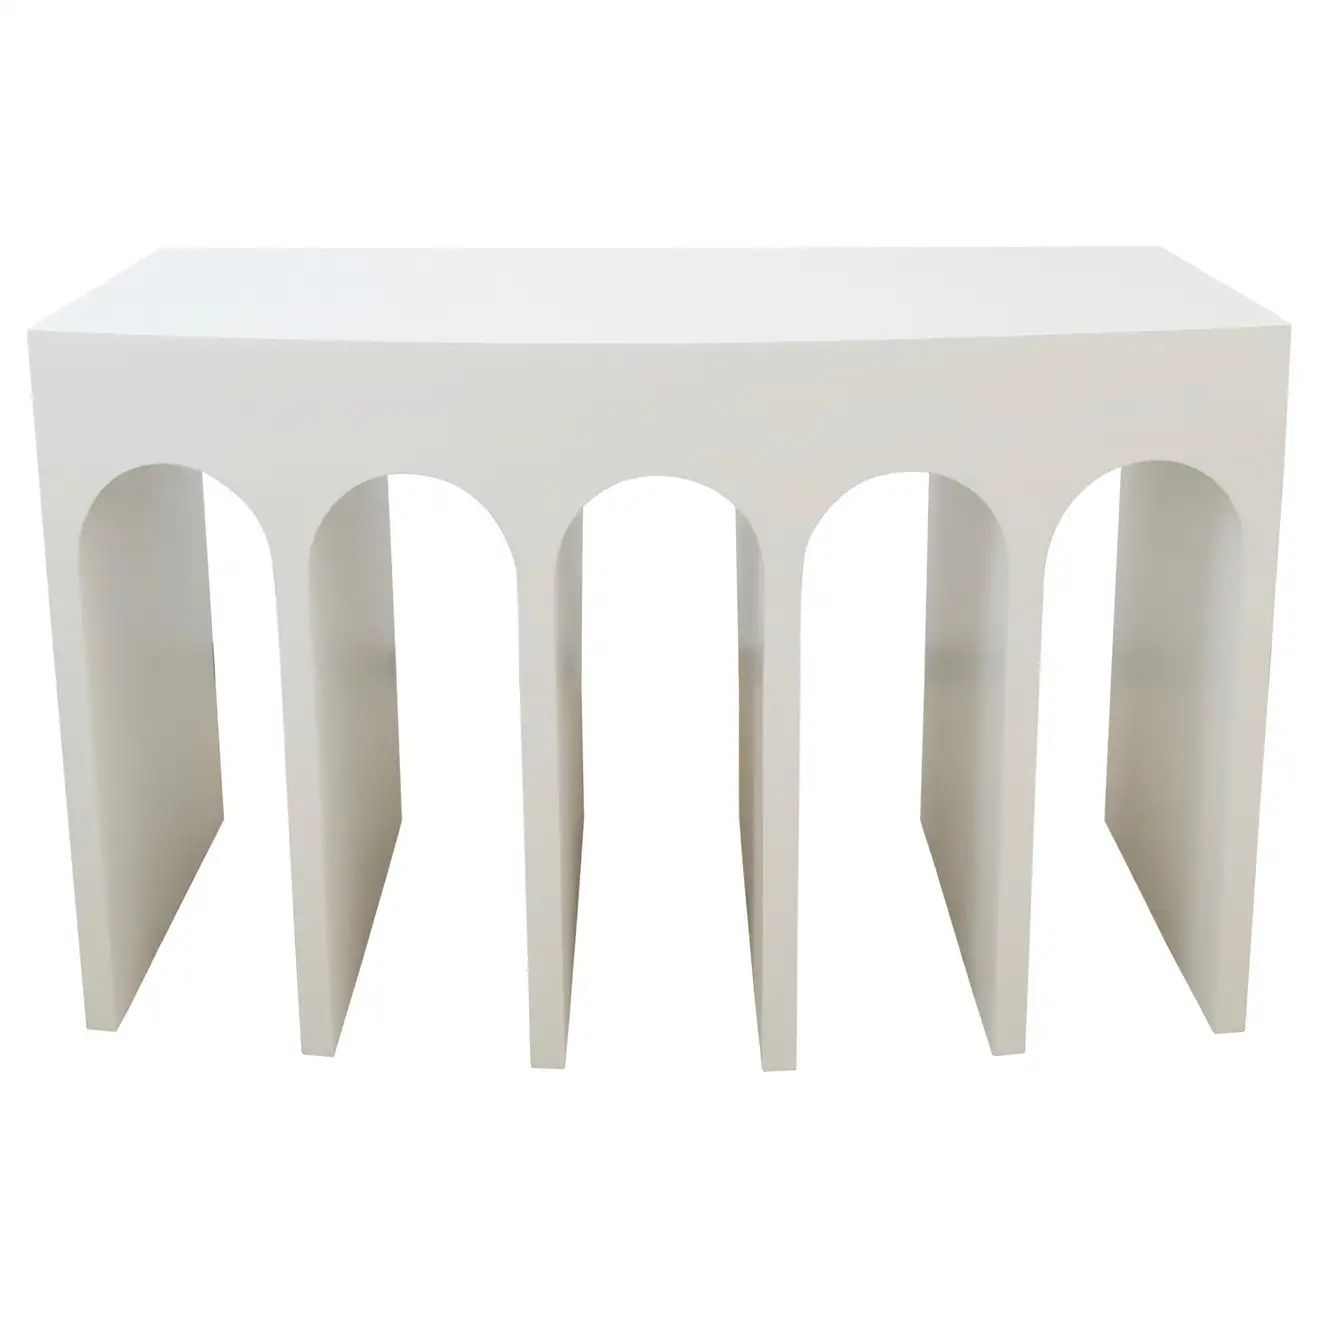 Minimalist Curved Front Console with Arches in White by Martin and Brockett | 1stDibs